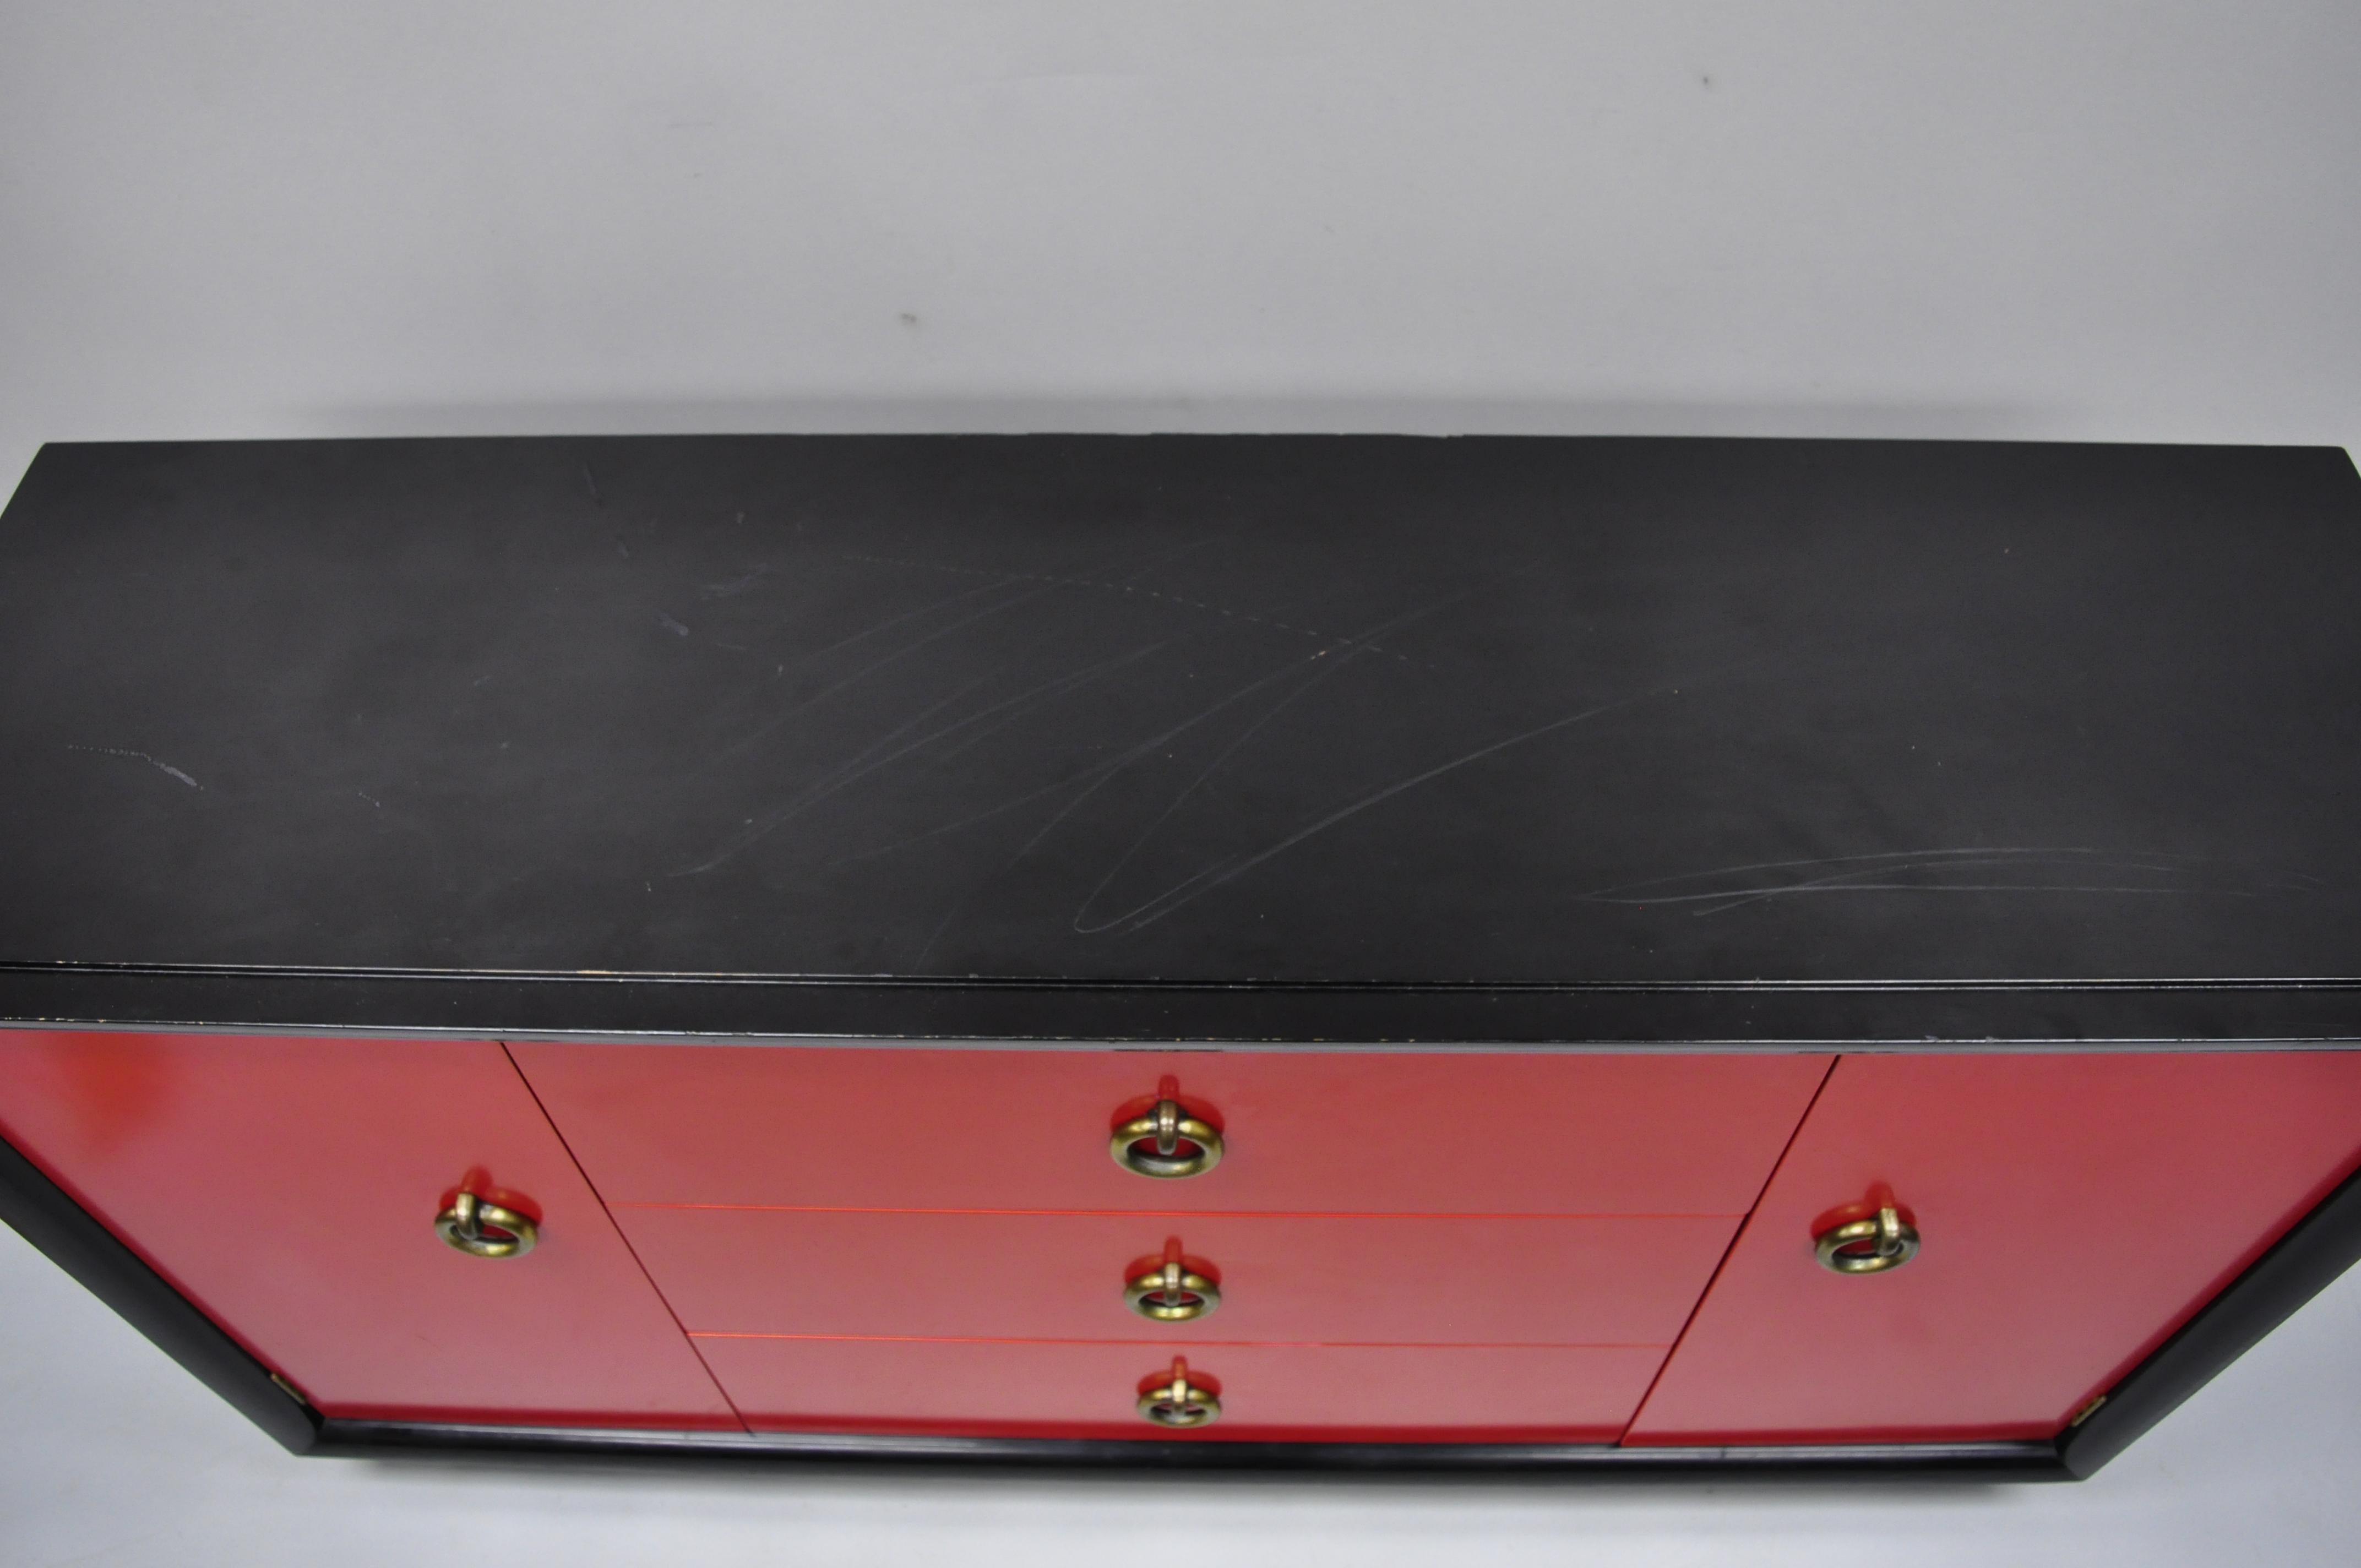 American Vintage Mid-Century Modern Art Deco Black and Red Credenza Sideboard by Harjer For Sale